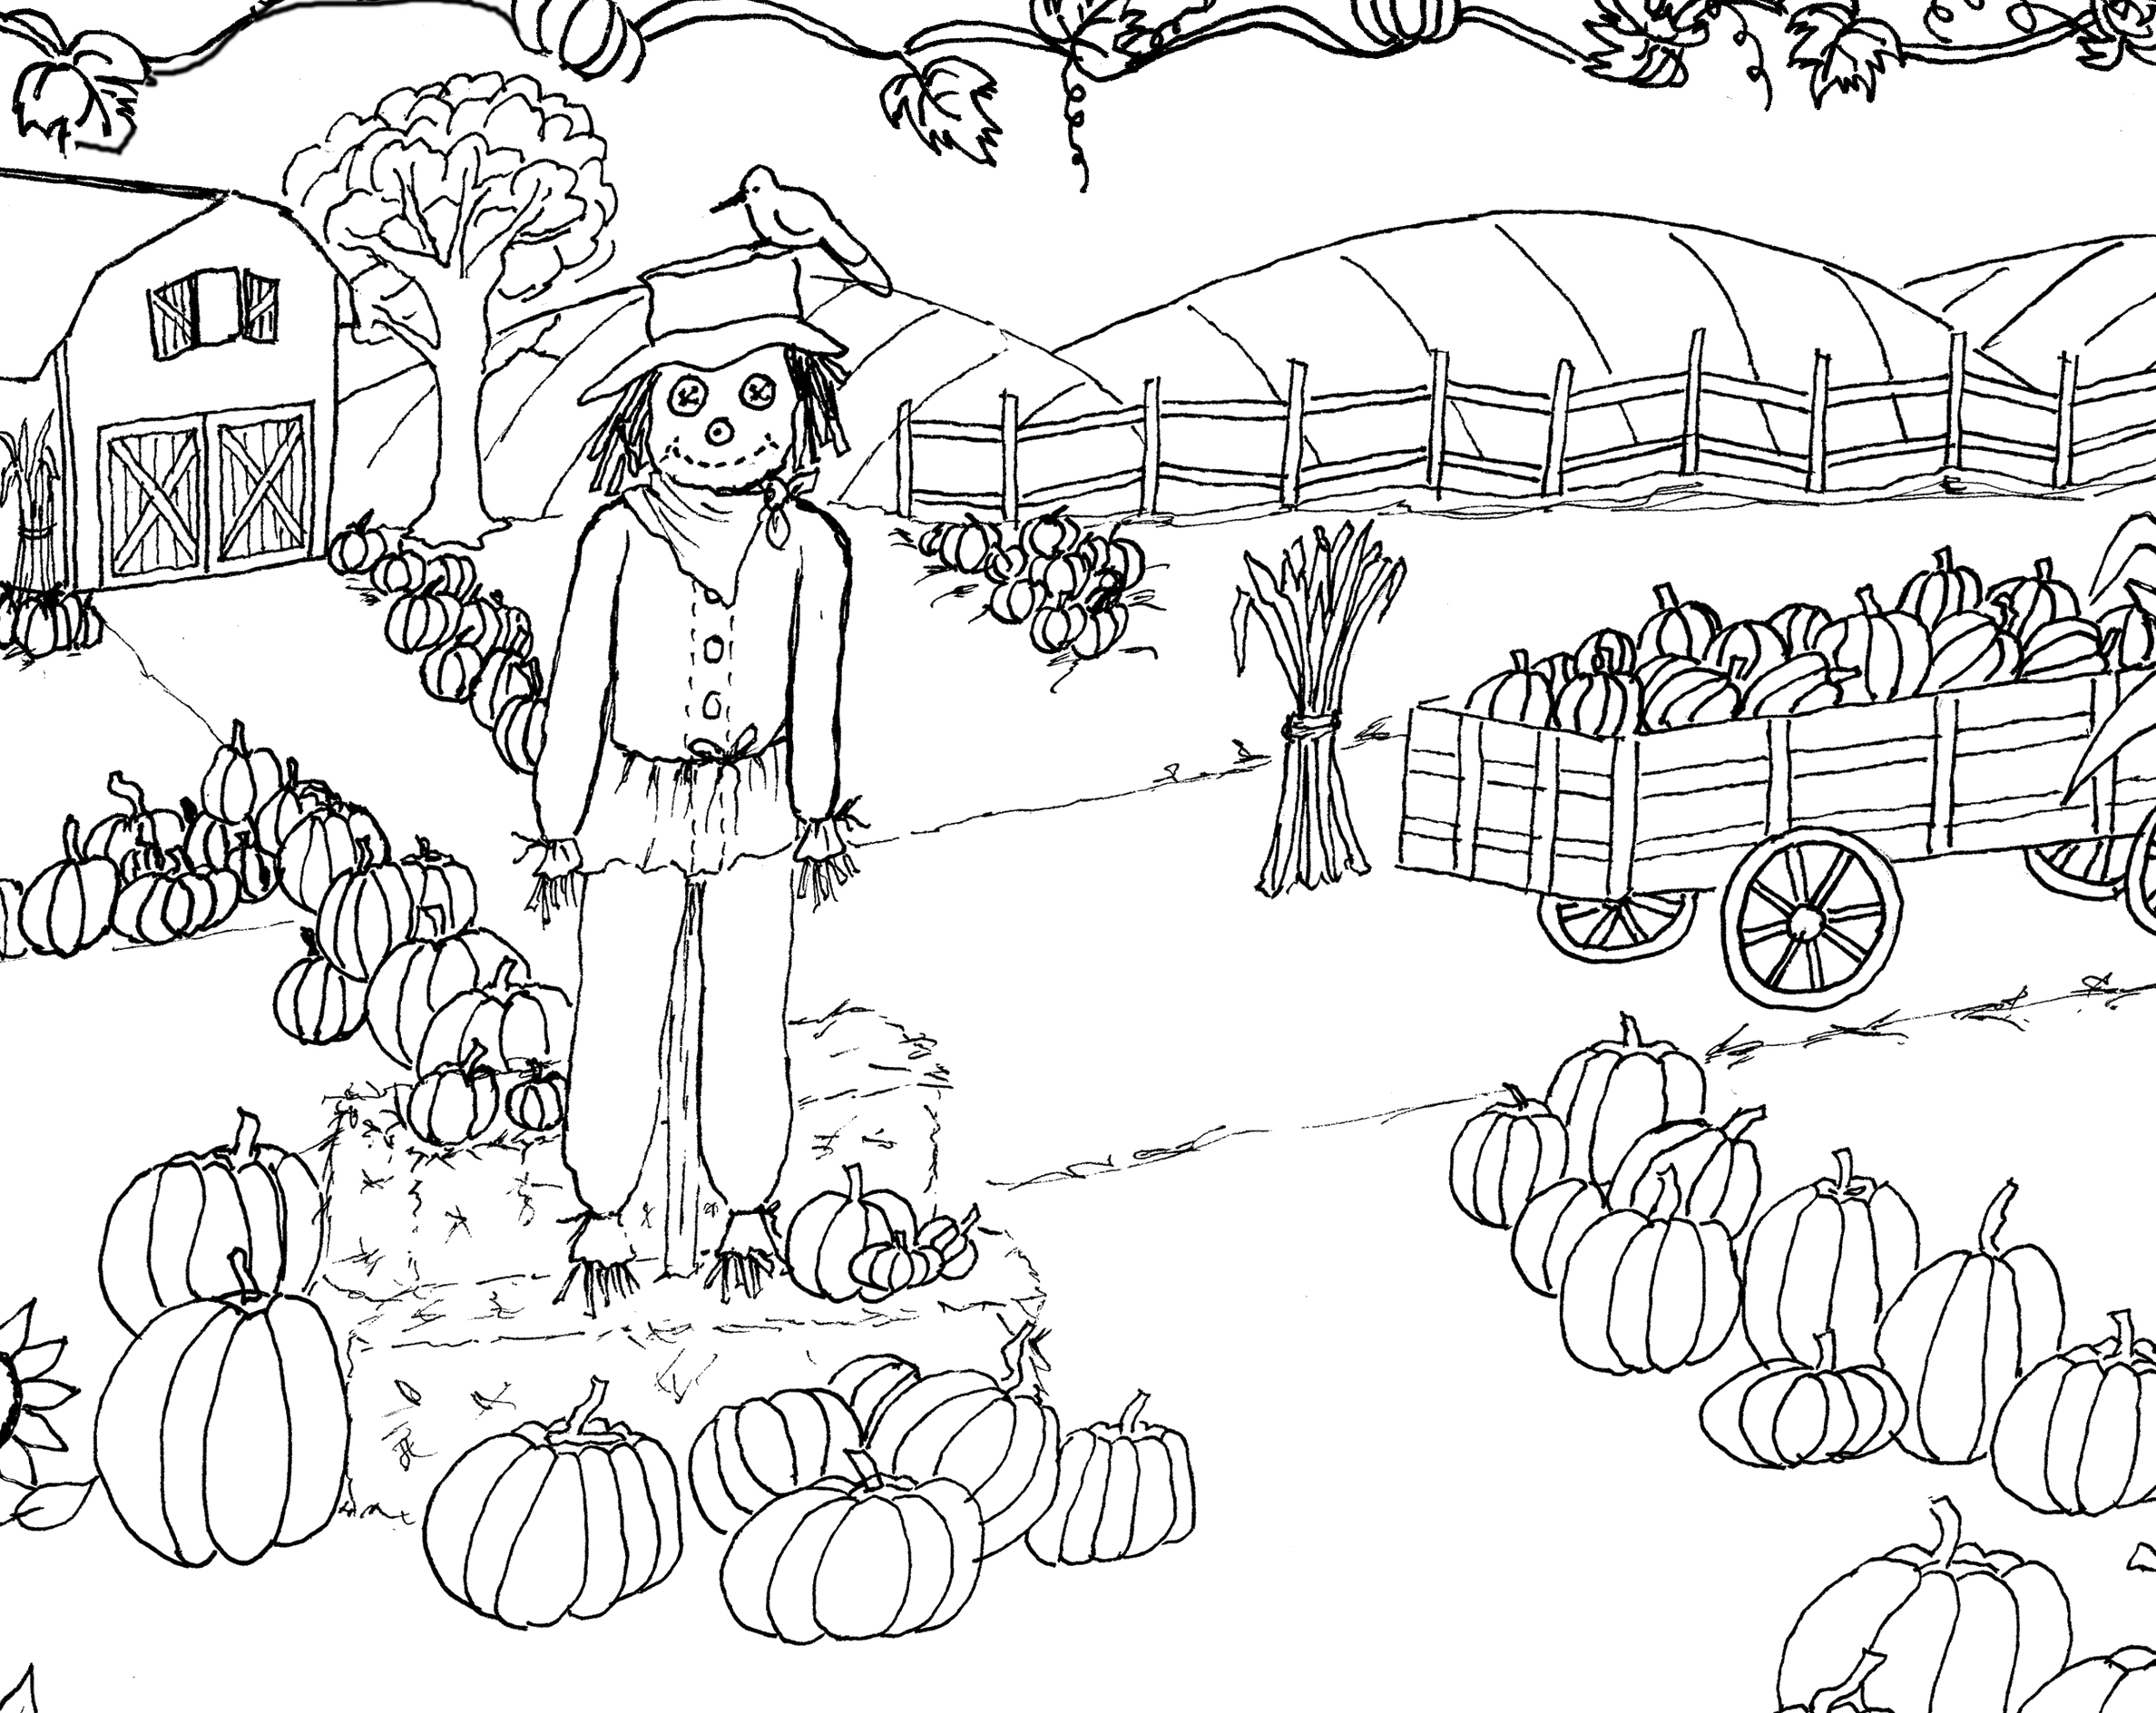 Pumpkin patch coloring page printable